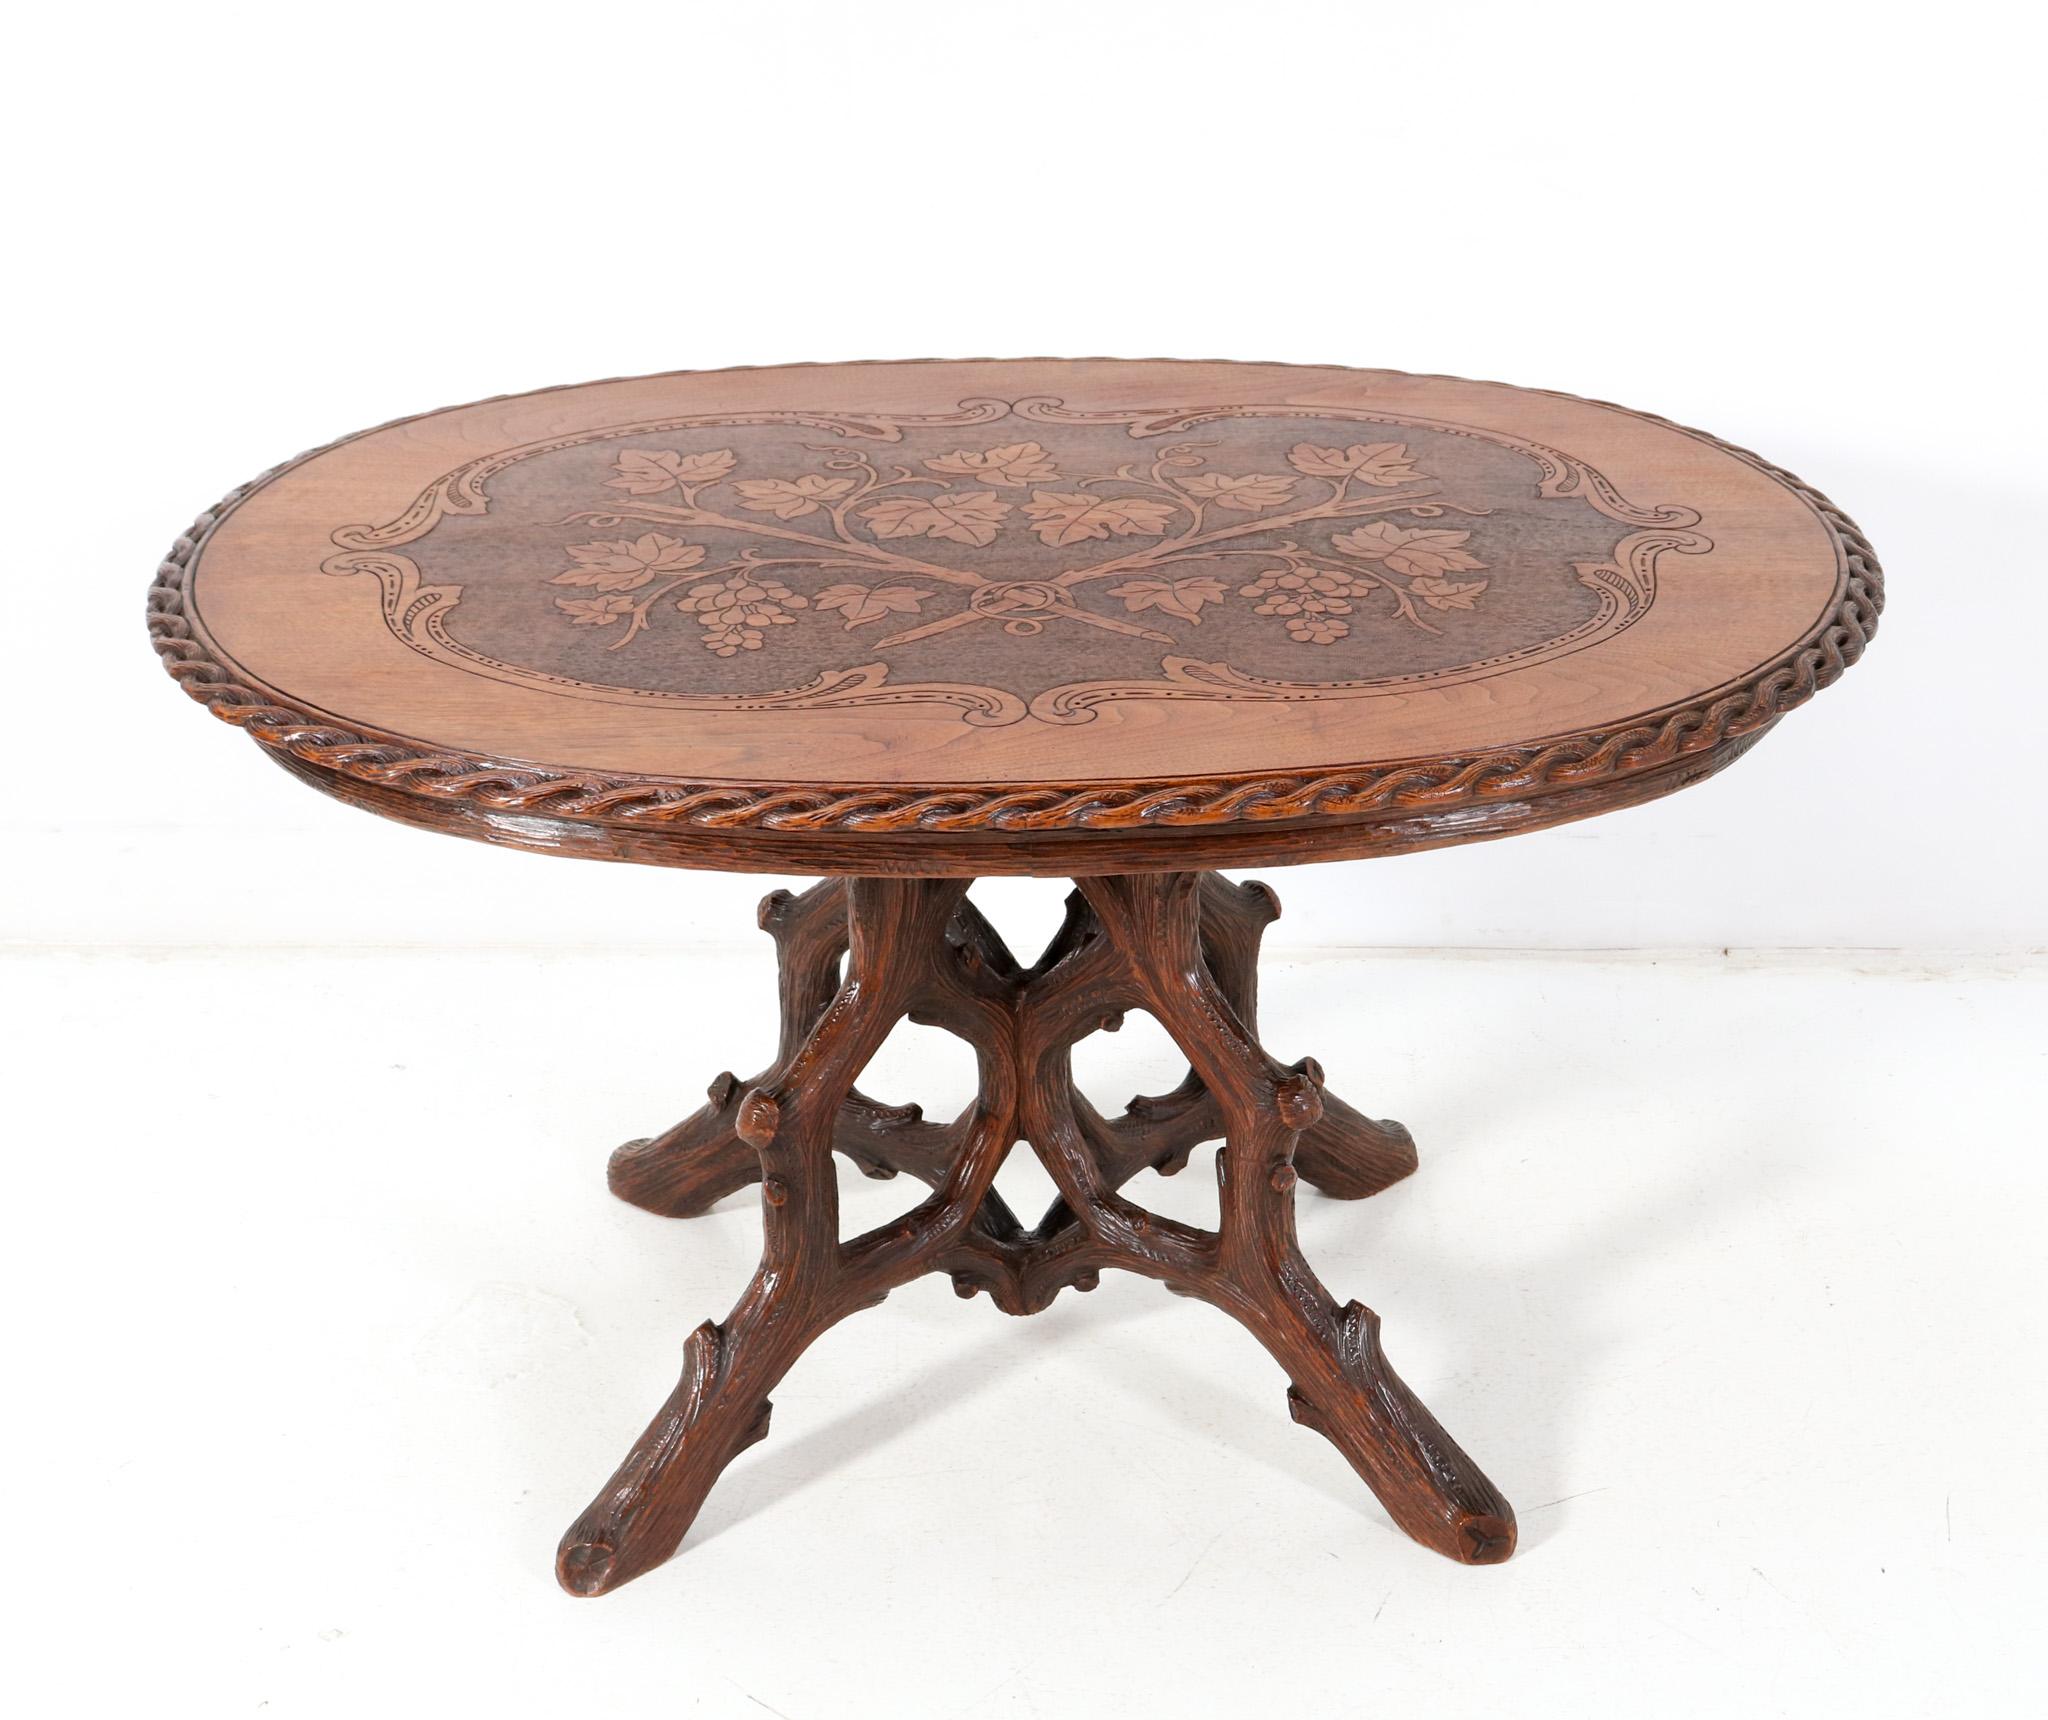 Magnificent and ultra rare Black Forest center table. Design by Matthijs Horrix for the famous Dutch cabinet makers Horrix Den Haag. Striking Dutch design from the 1880s. Solid hand-carved walnut base with original hand-carved and inlaid top. This